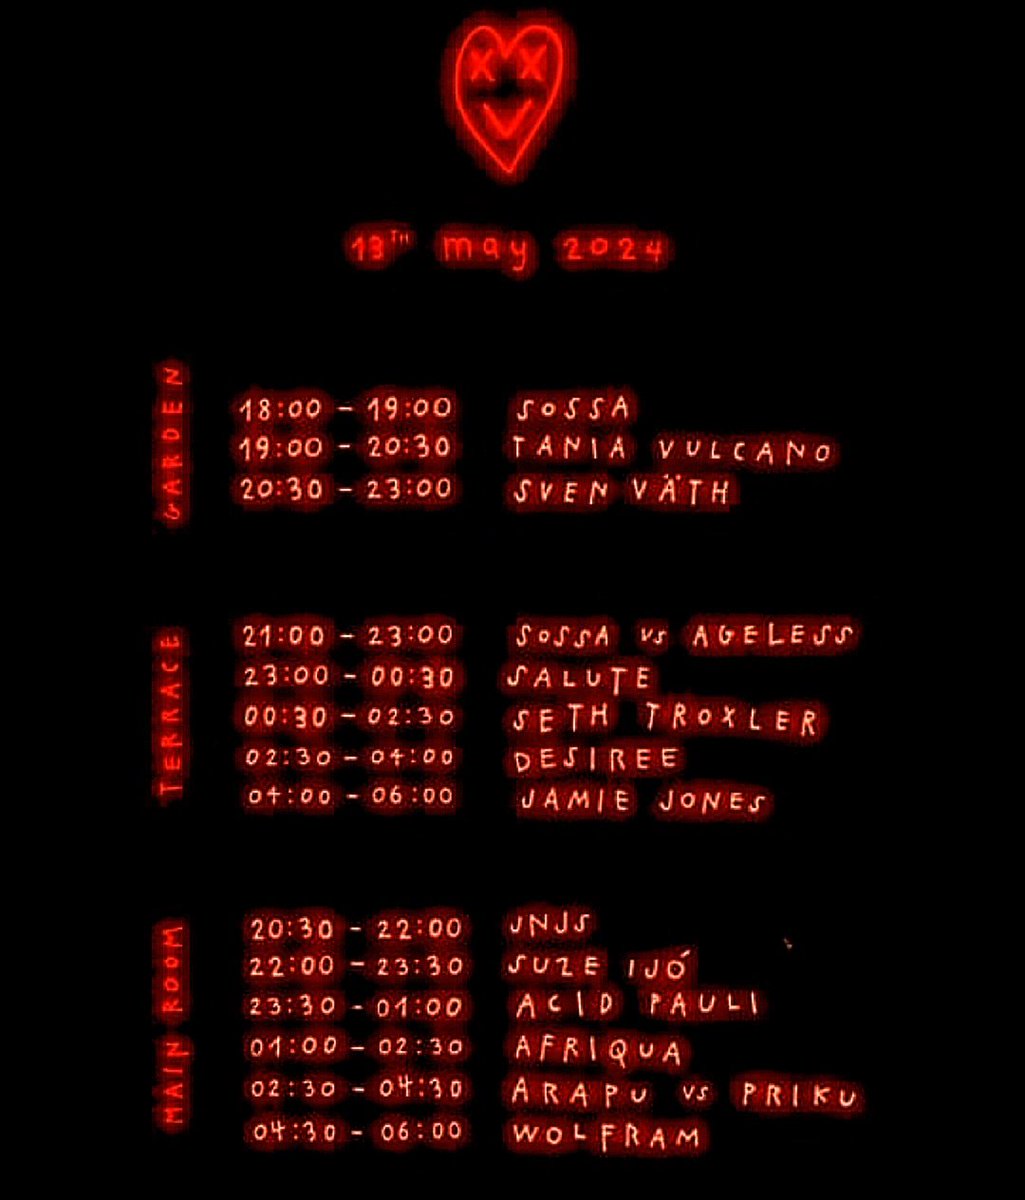 Set times for @circolocoibiza today @dc10ibiza
Including the legendary @svenvaeth
And all the usual suspects 
No monday blues here 

#Ibiza